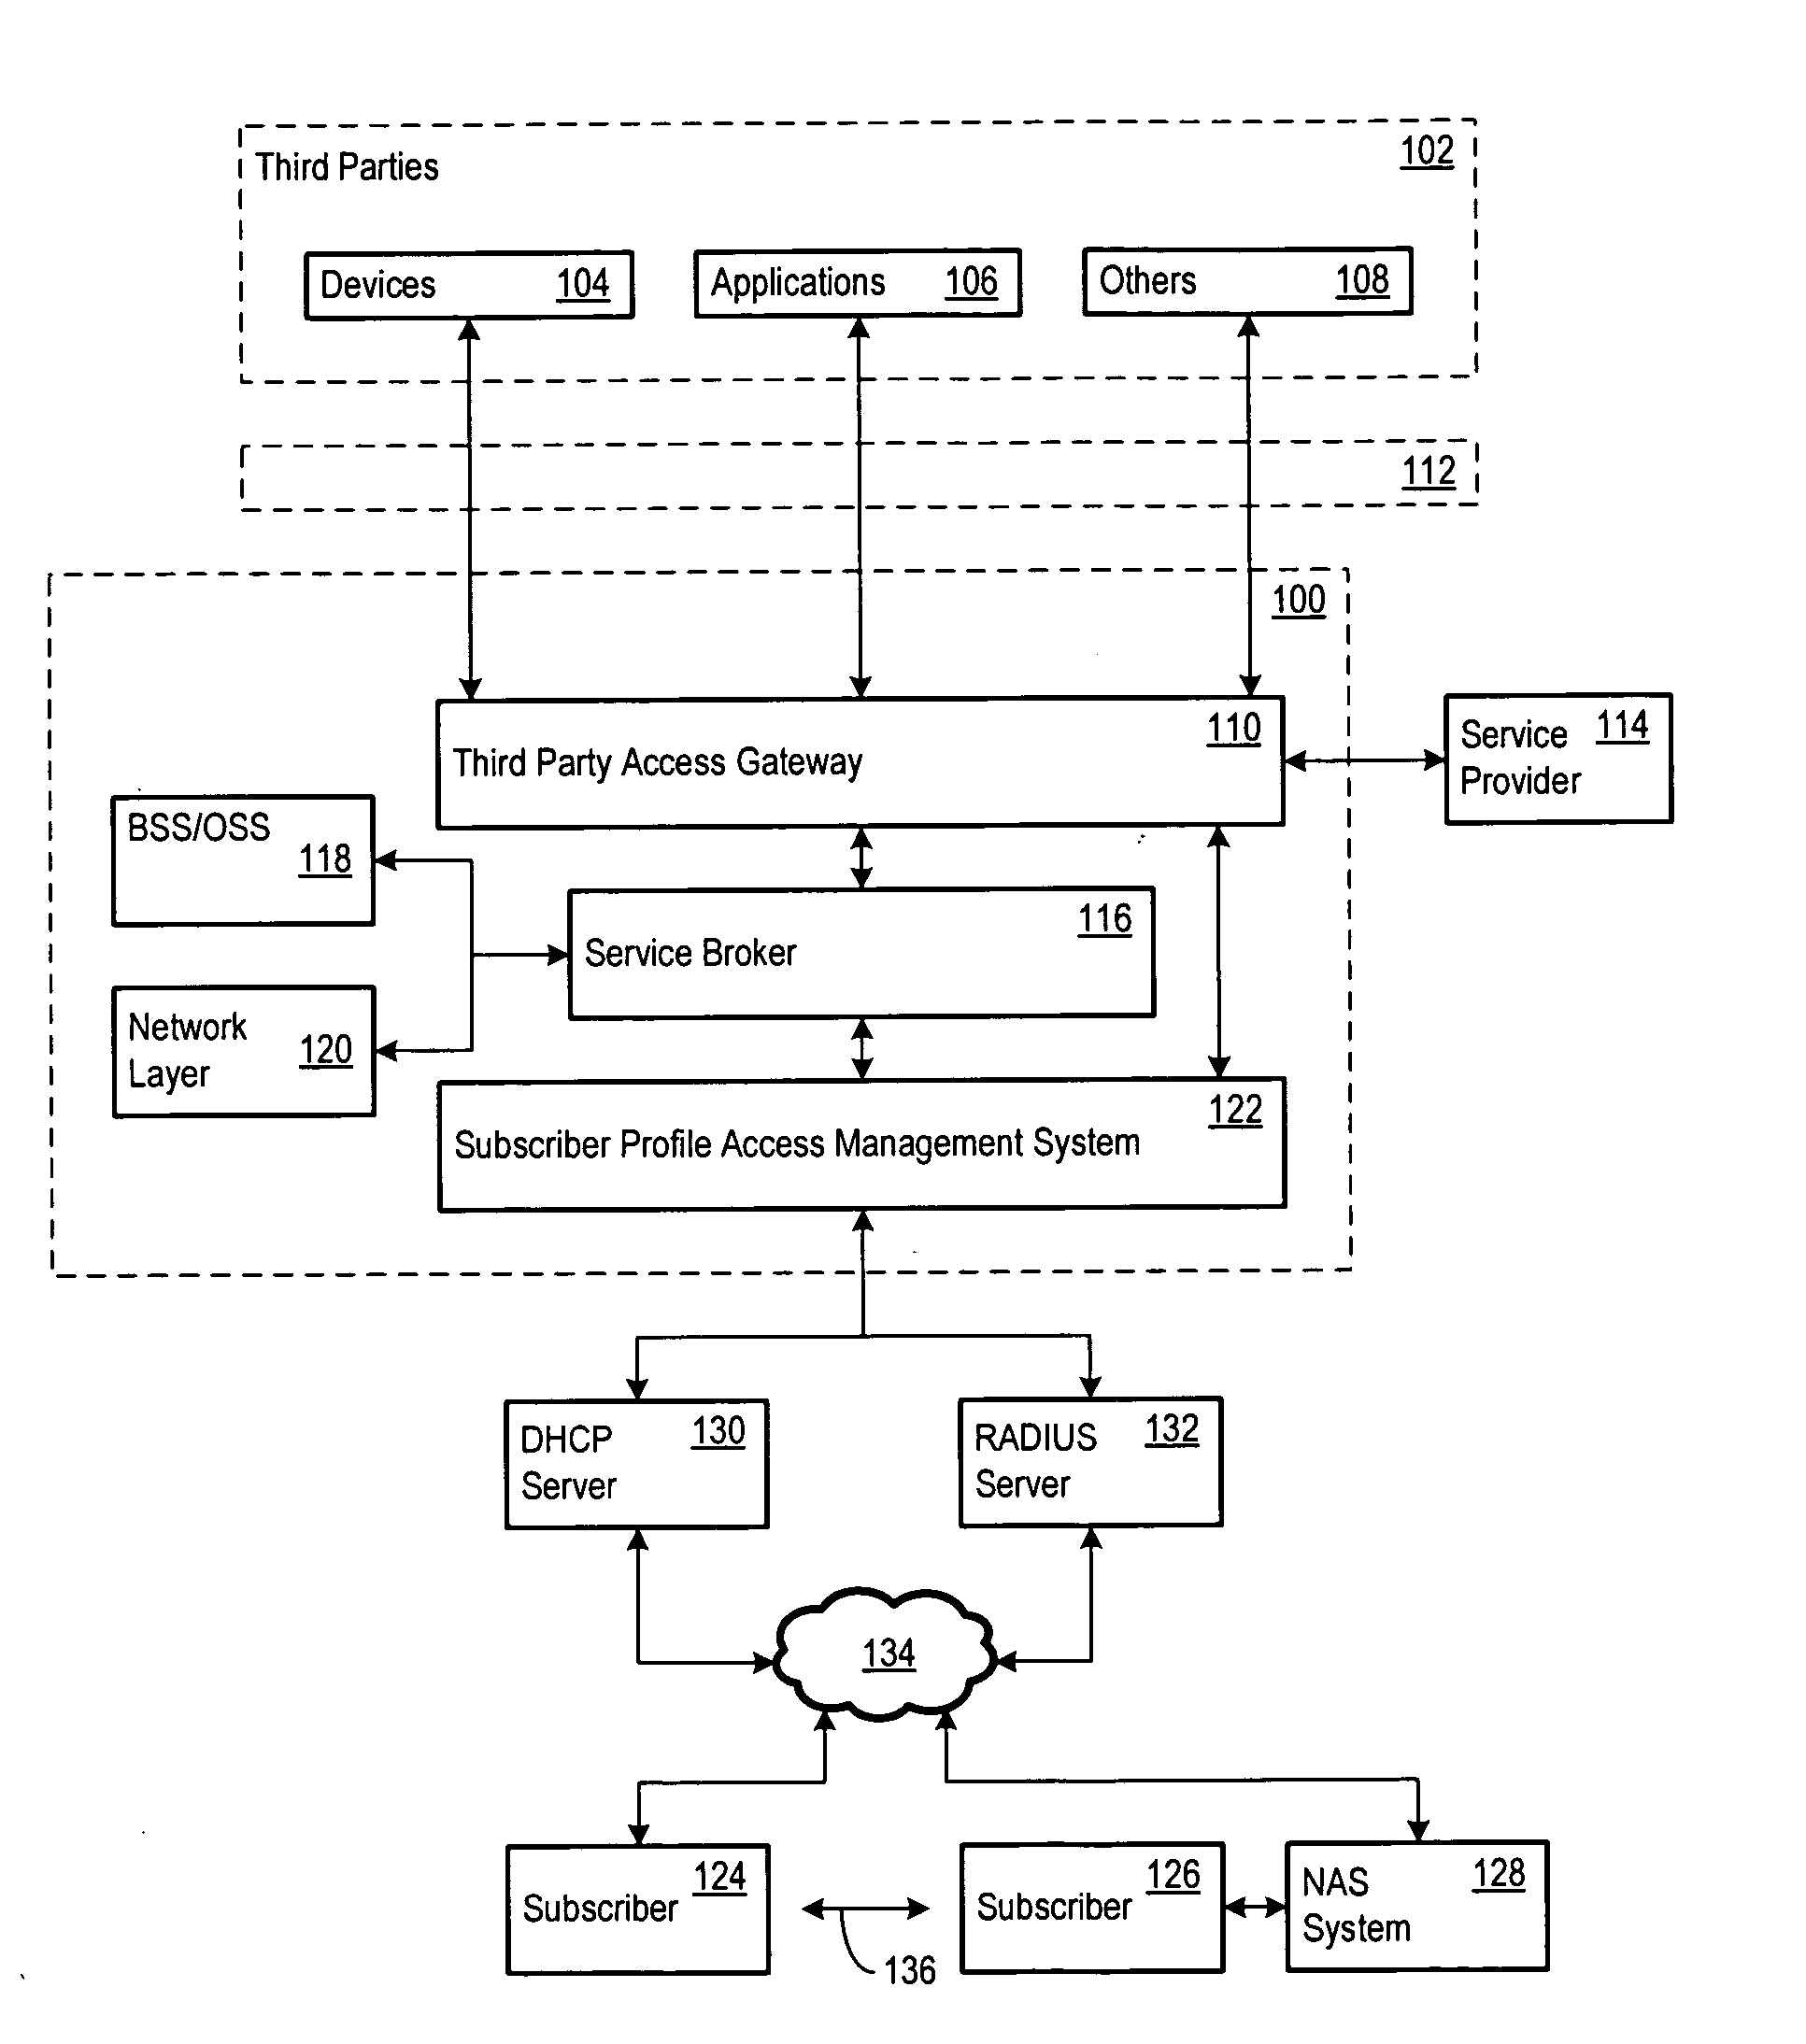 Unified directory and presence system for universal access to telecommunications services